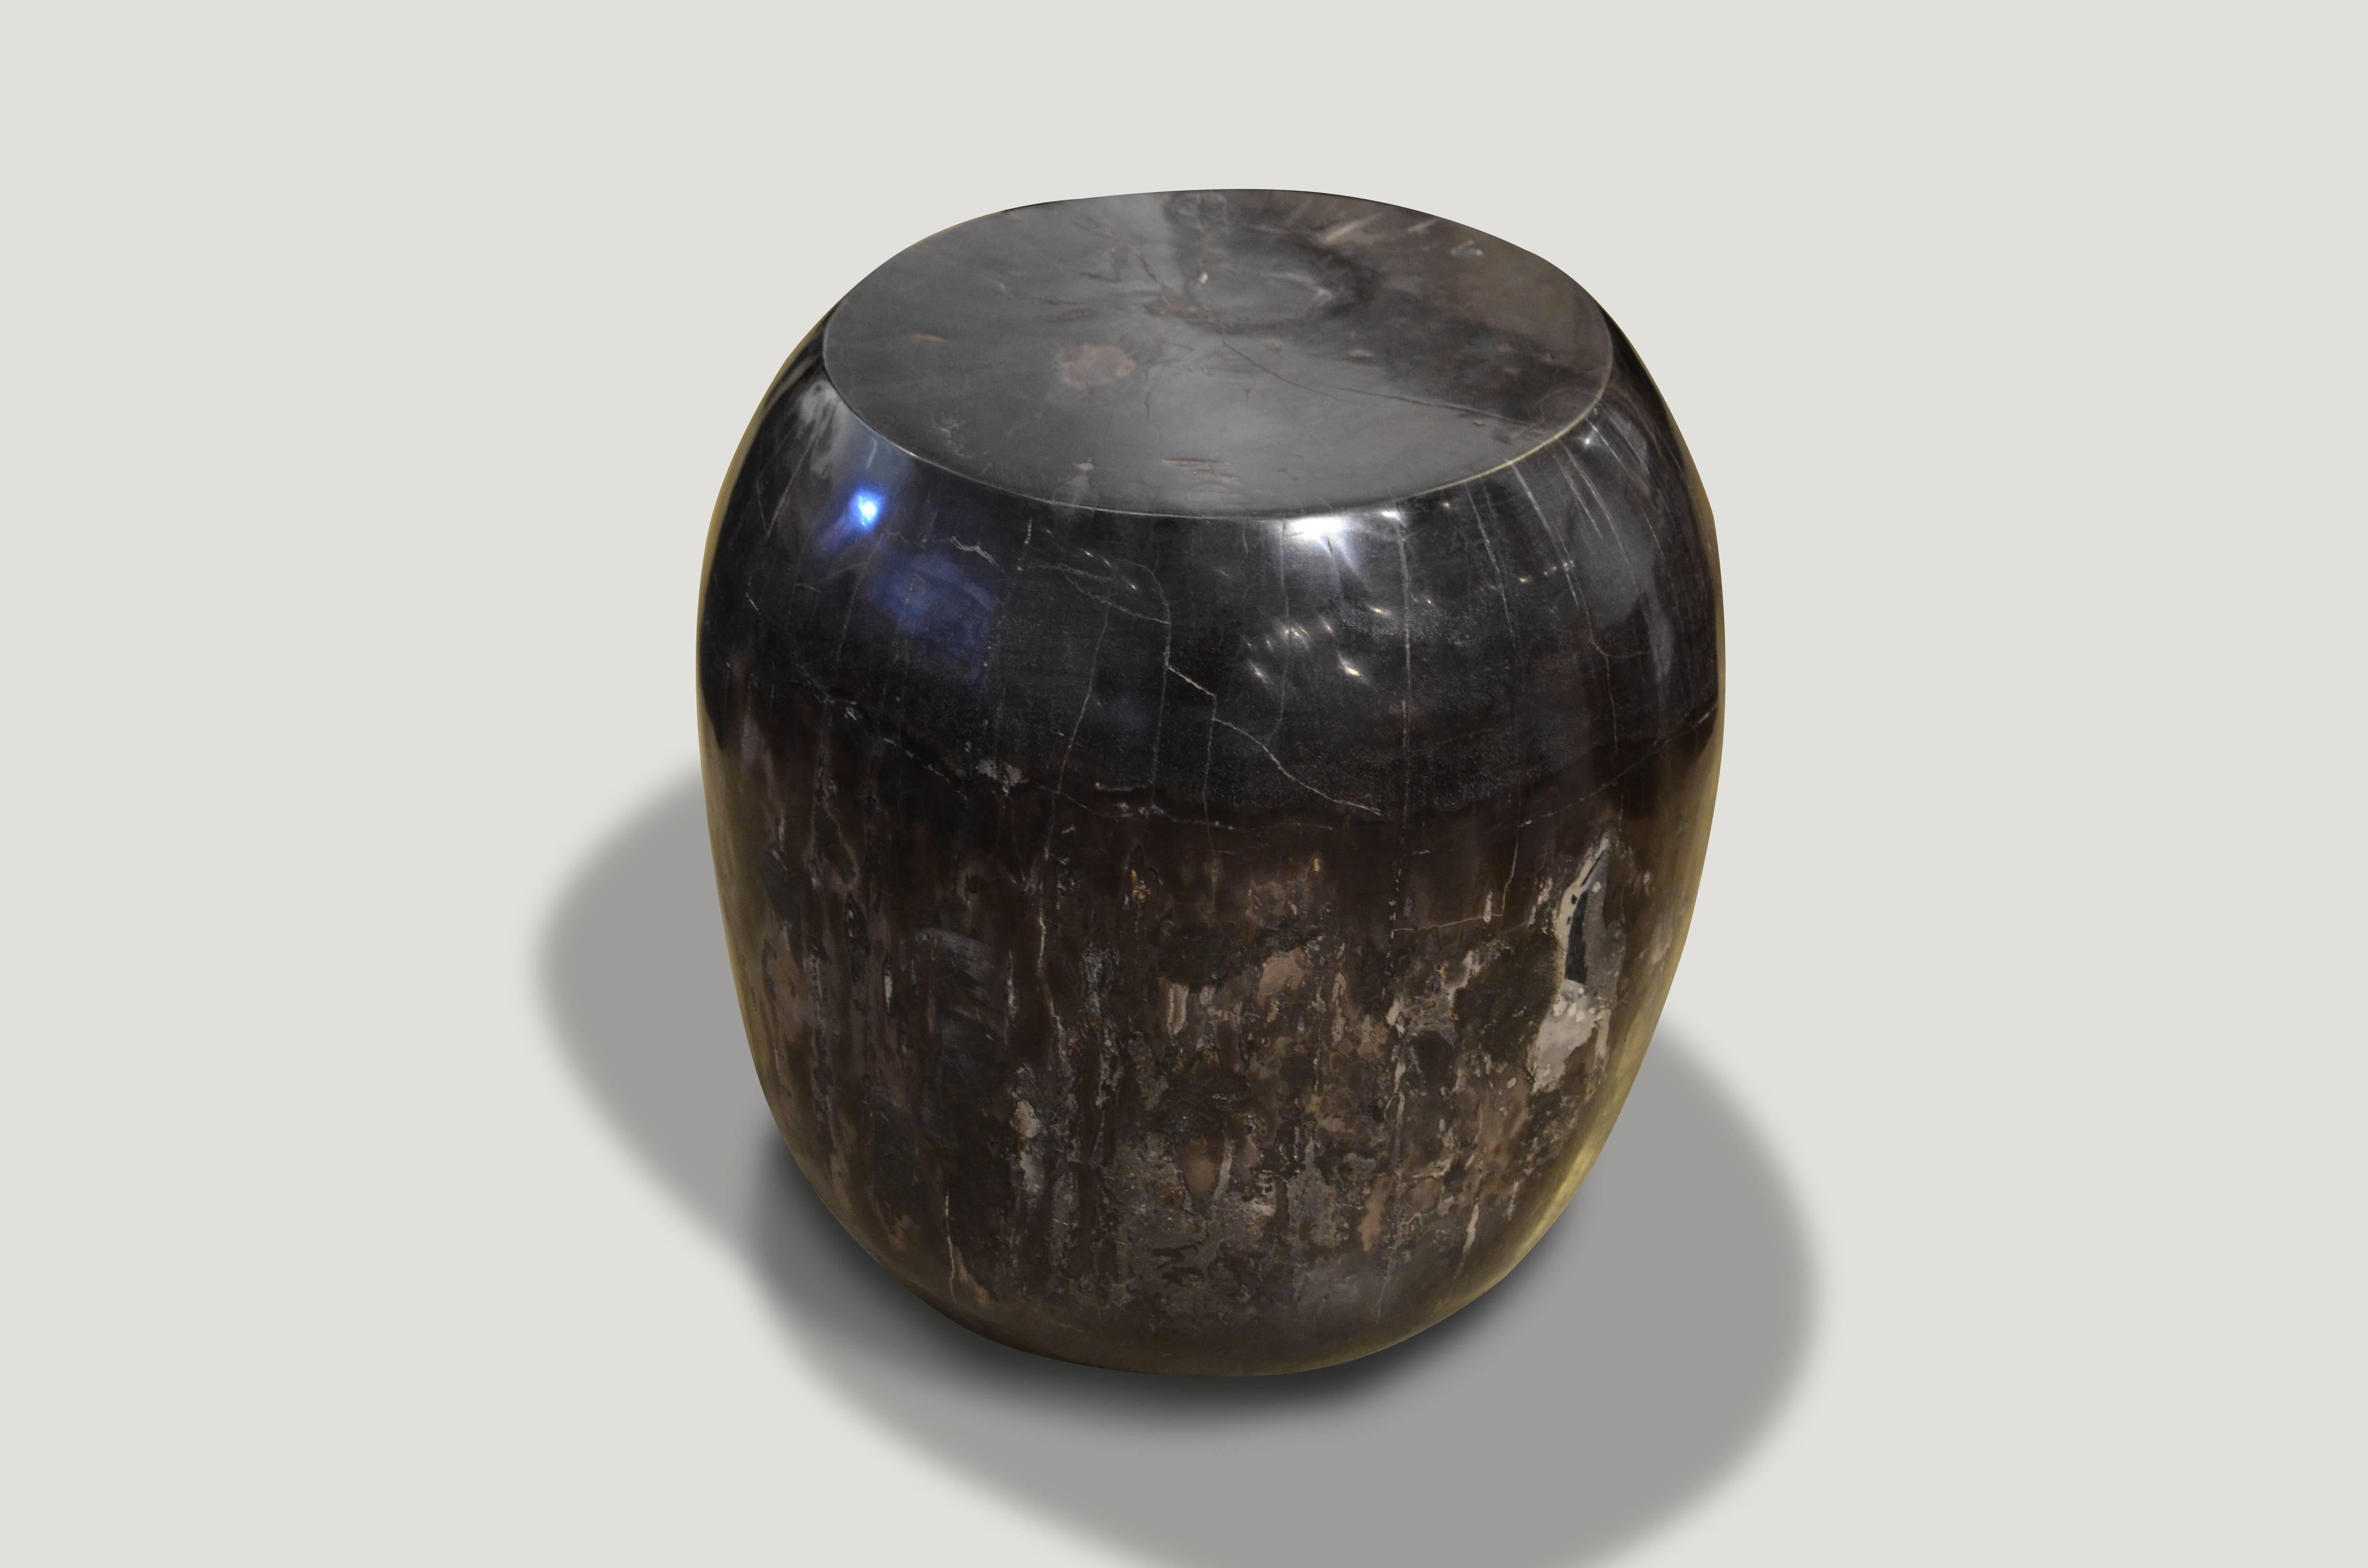 Super smooth petrified wood drum shape side table.

We source the highest quality petrified wood available. Each piece is hand selected and highly polished with minimal cracks. Petrified wood is extremely versatile – even great inside a bathroom